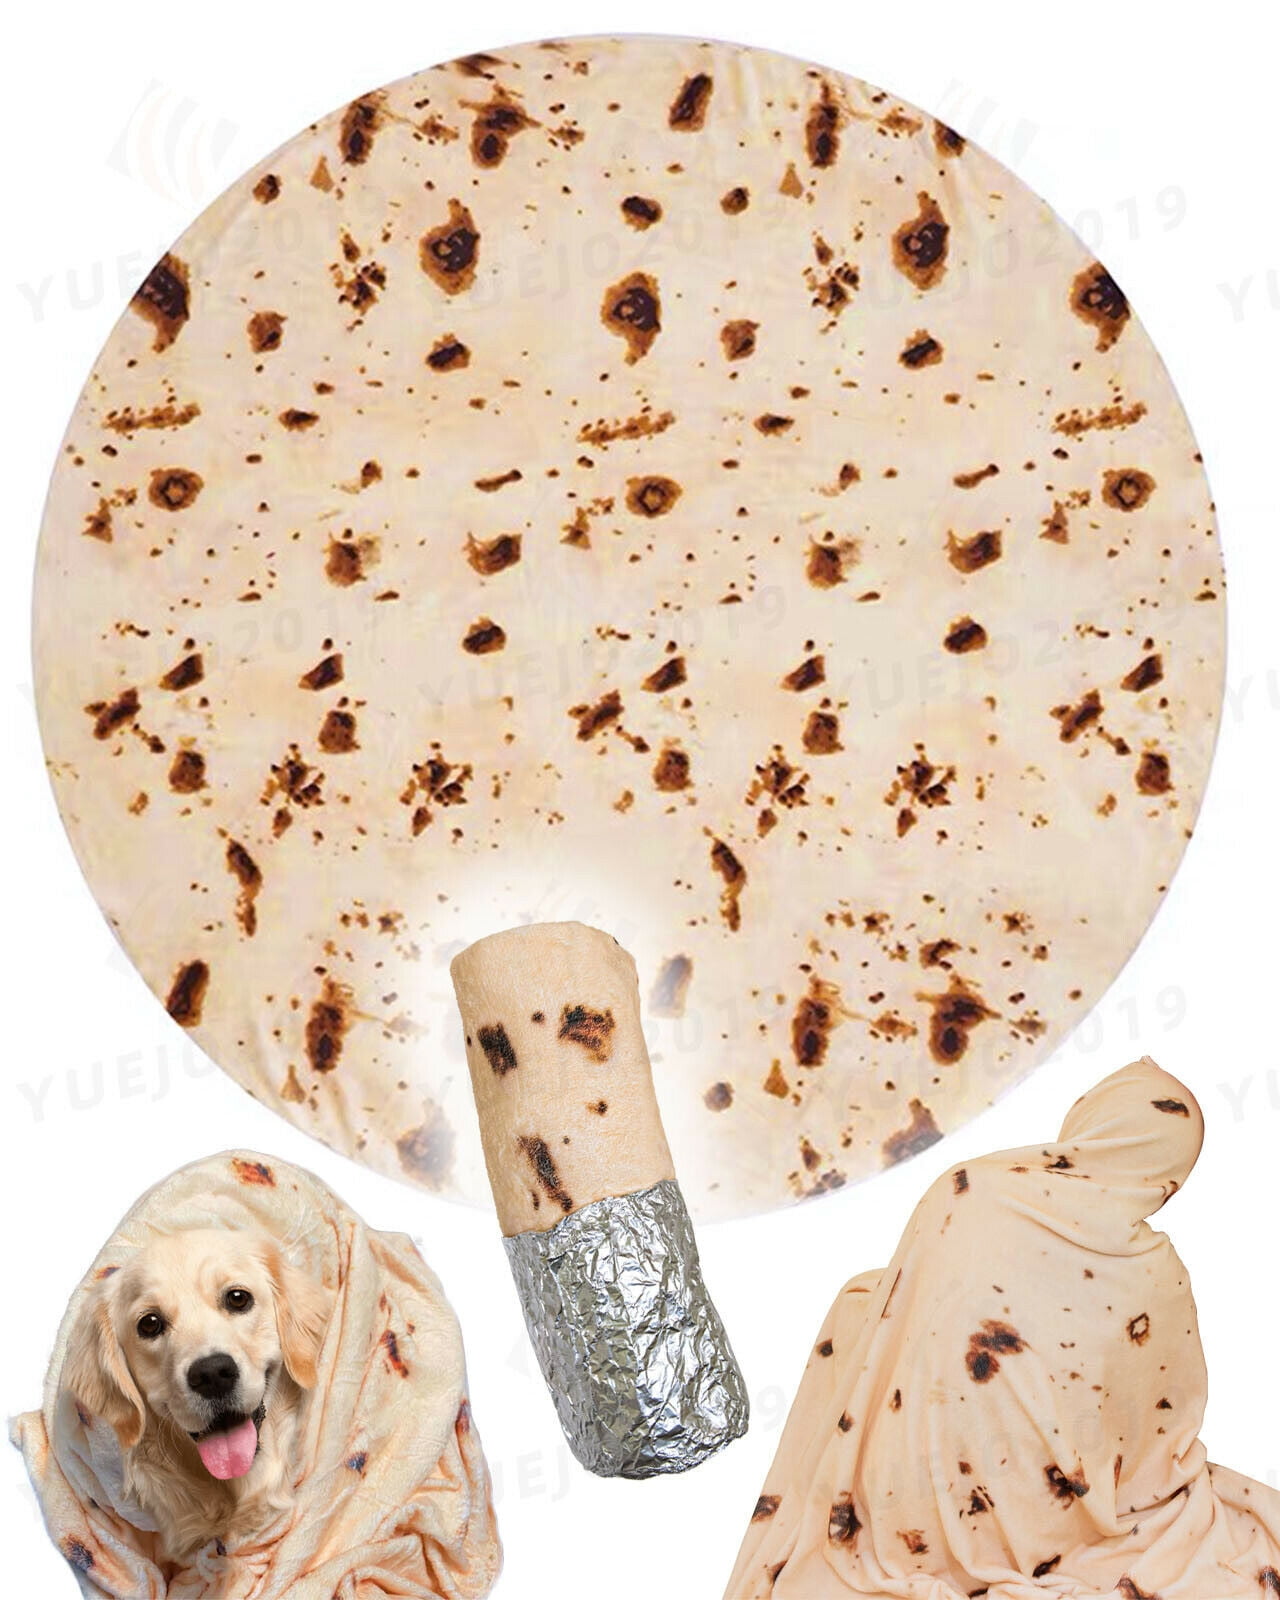 Details about   2020 Tortilla Blanket 2.0 Double Sided 71 inches for Adult and Kids Giant Funny 